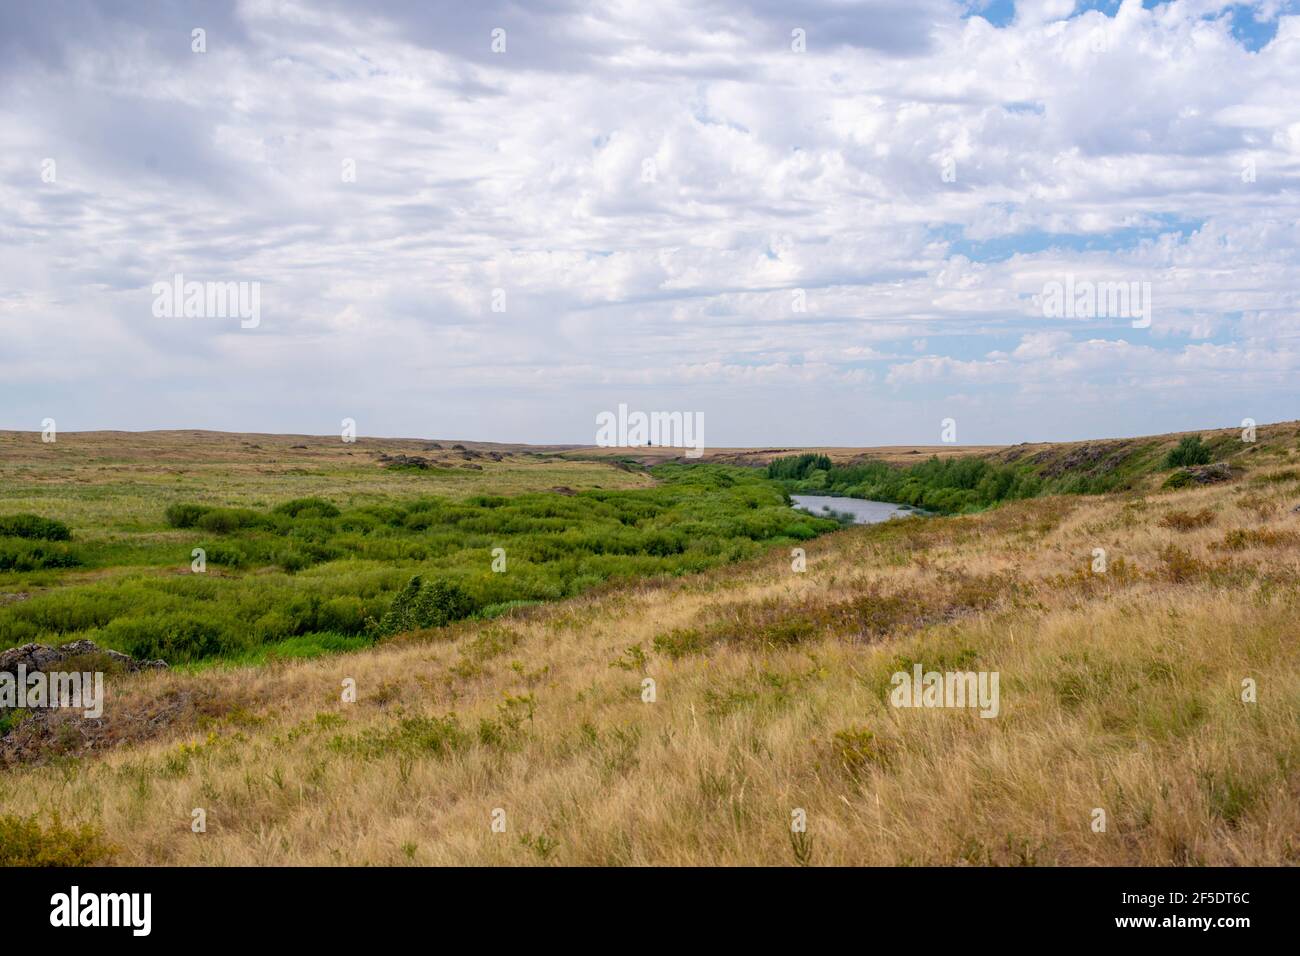 river bed cloudy sky dry yellow grass Stock Photo